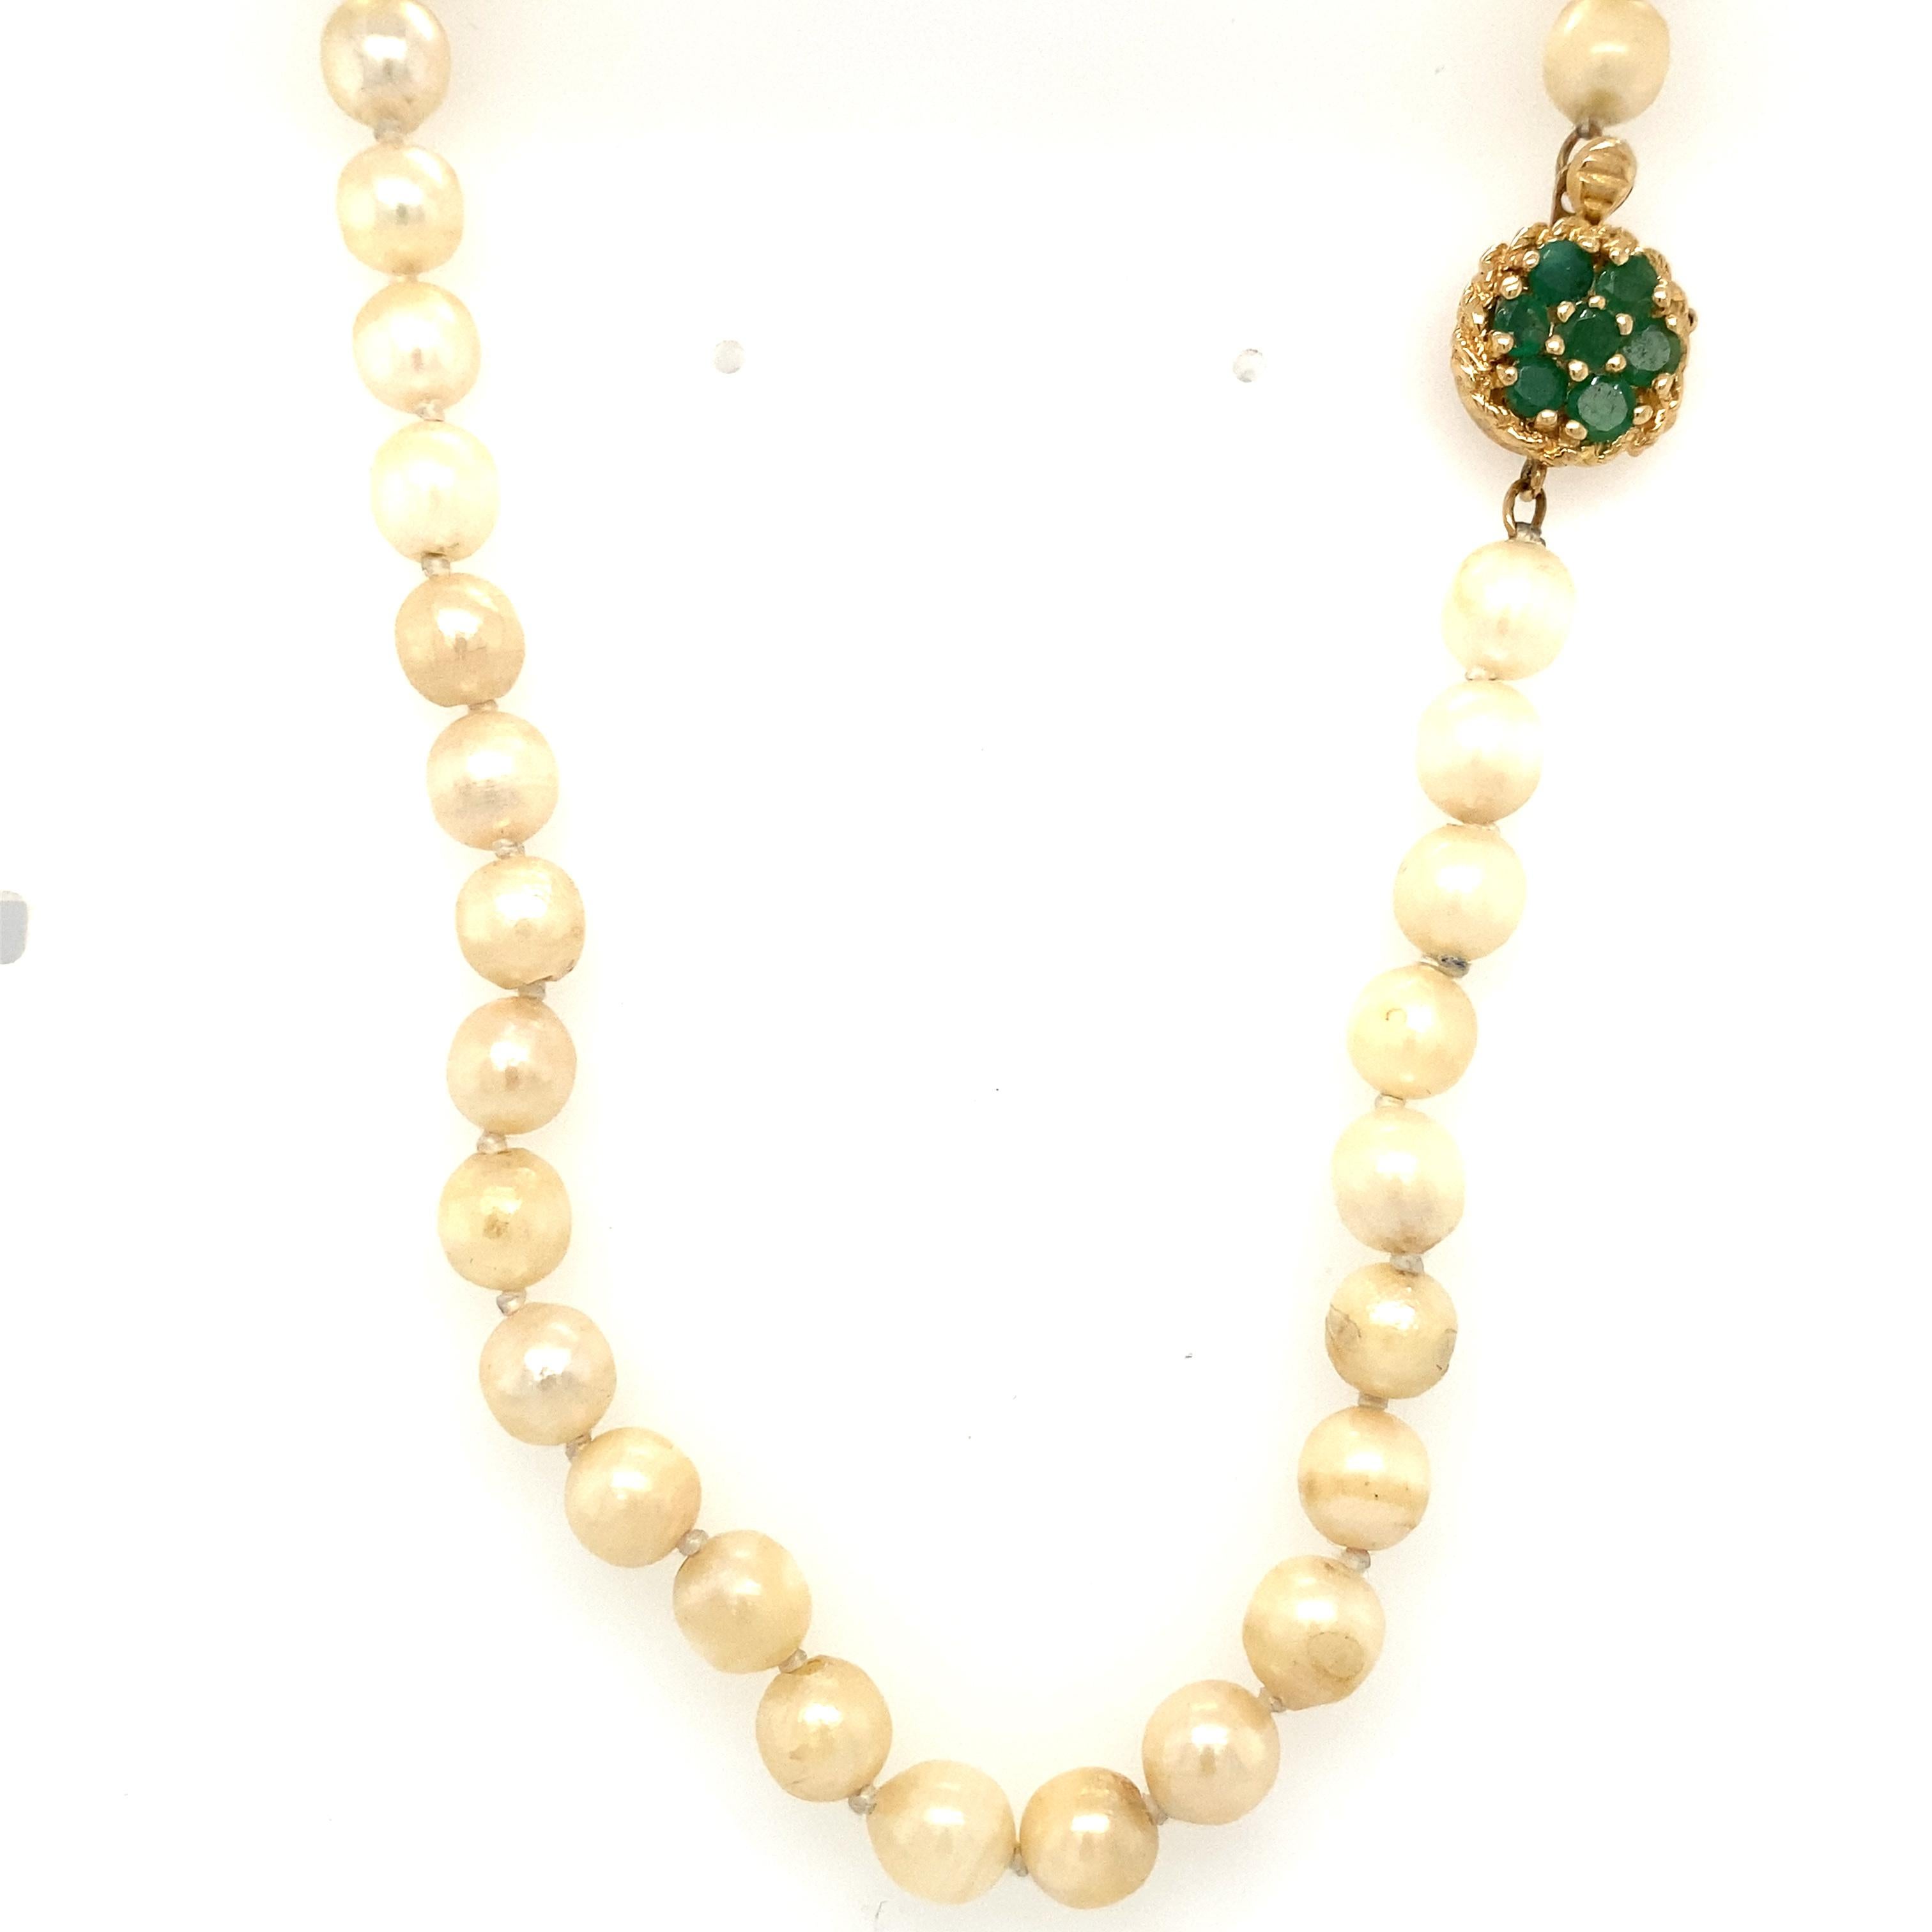 Retro 1960s Pearl Choker Strand with Emerald Clasp in 14 Karat Gold For Sale